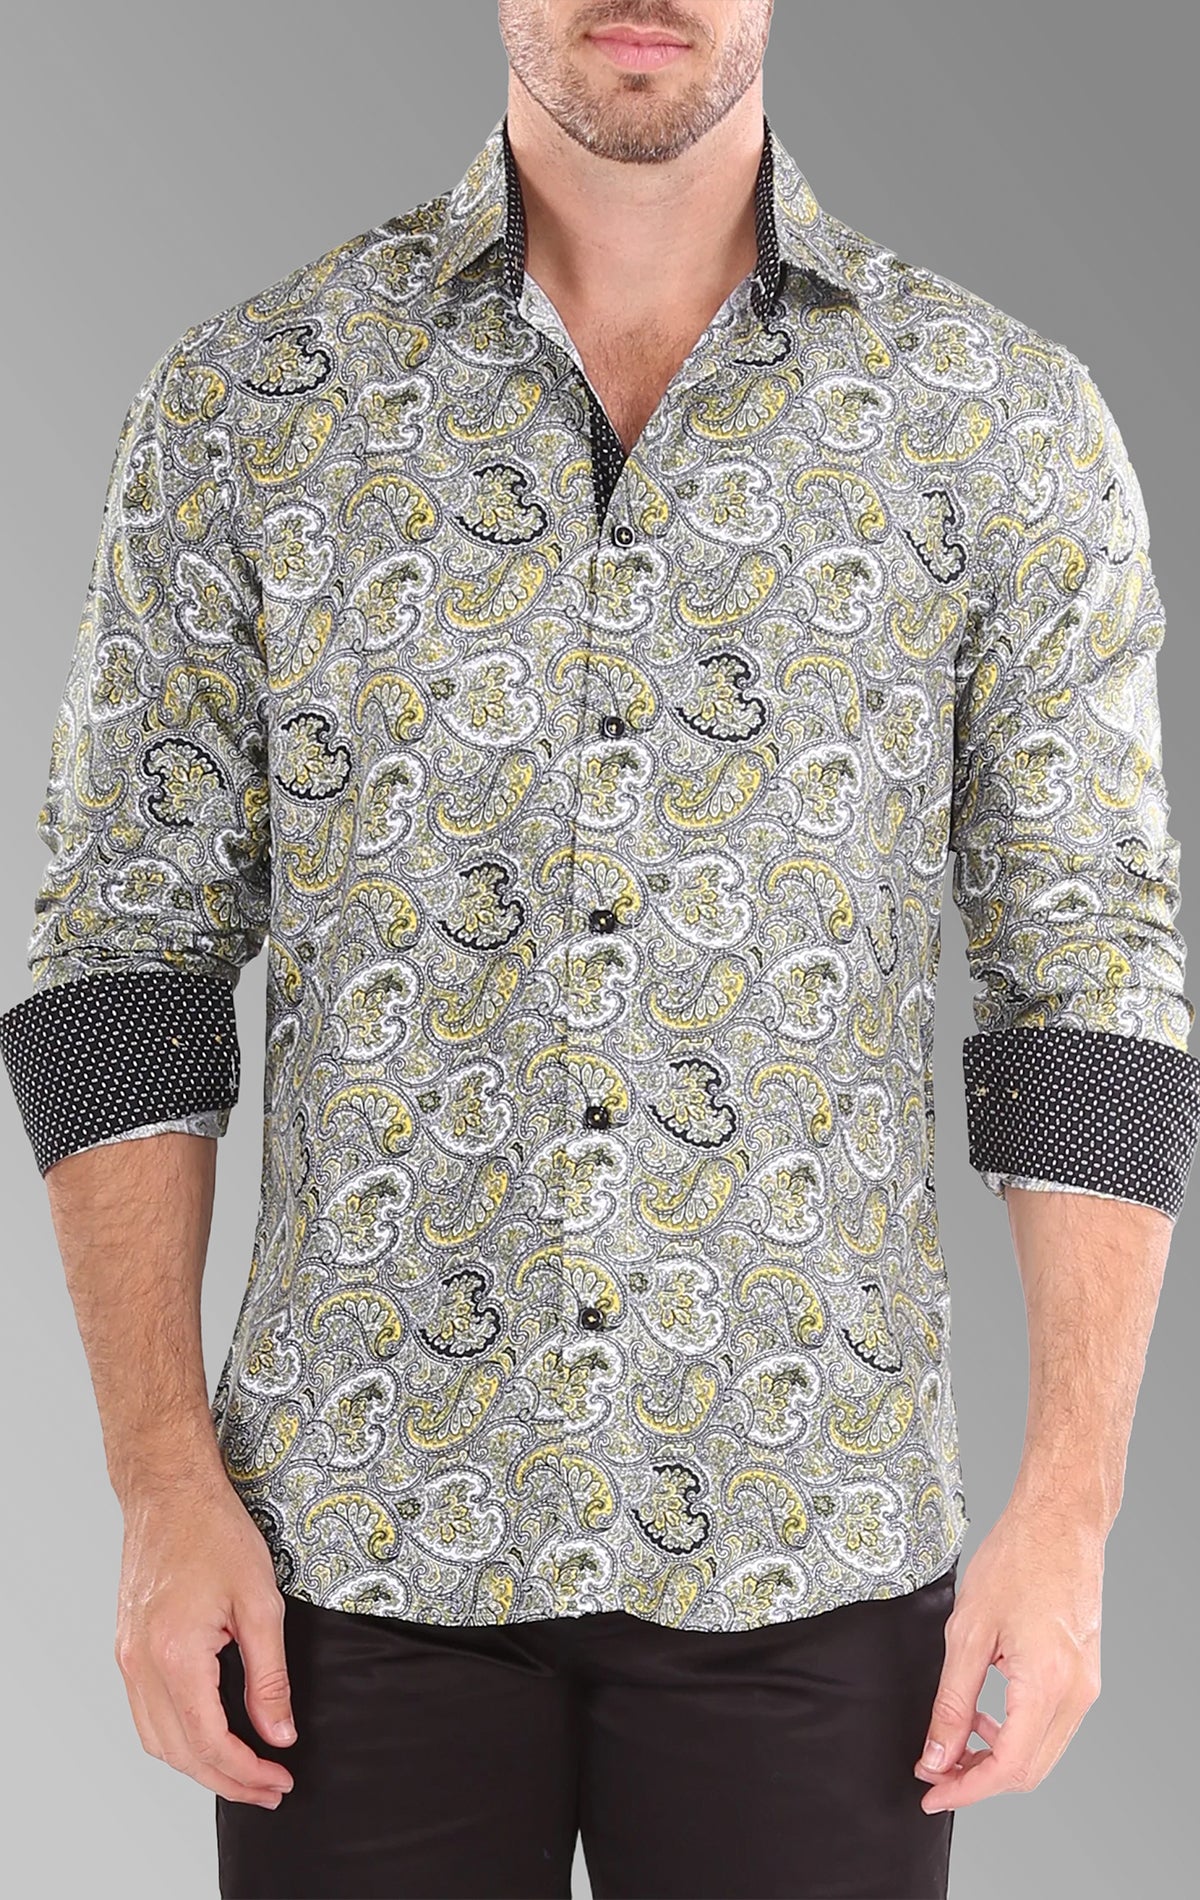 Arabian Inspired Paisley Pattern Printed Long Sleeve shirt with modern fit, adjustable cuffs, and contrast trims.